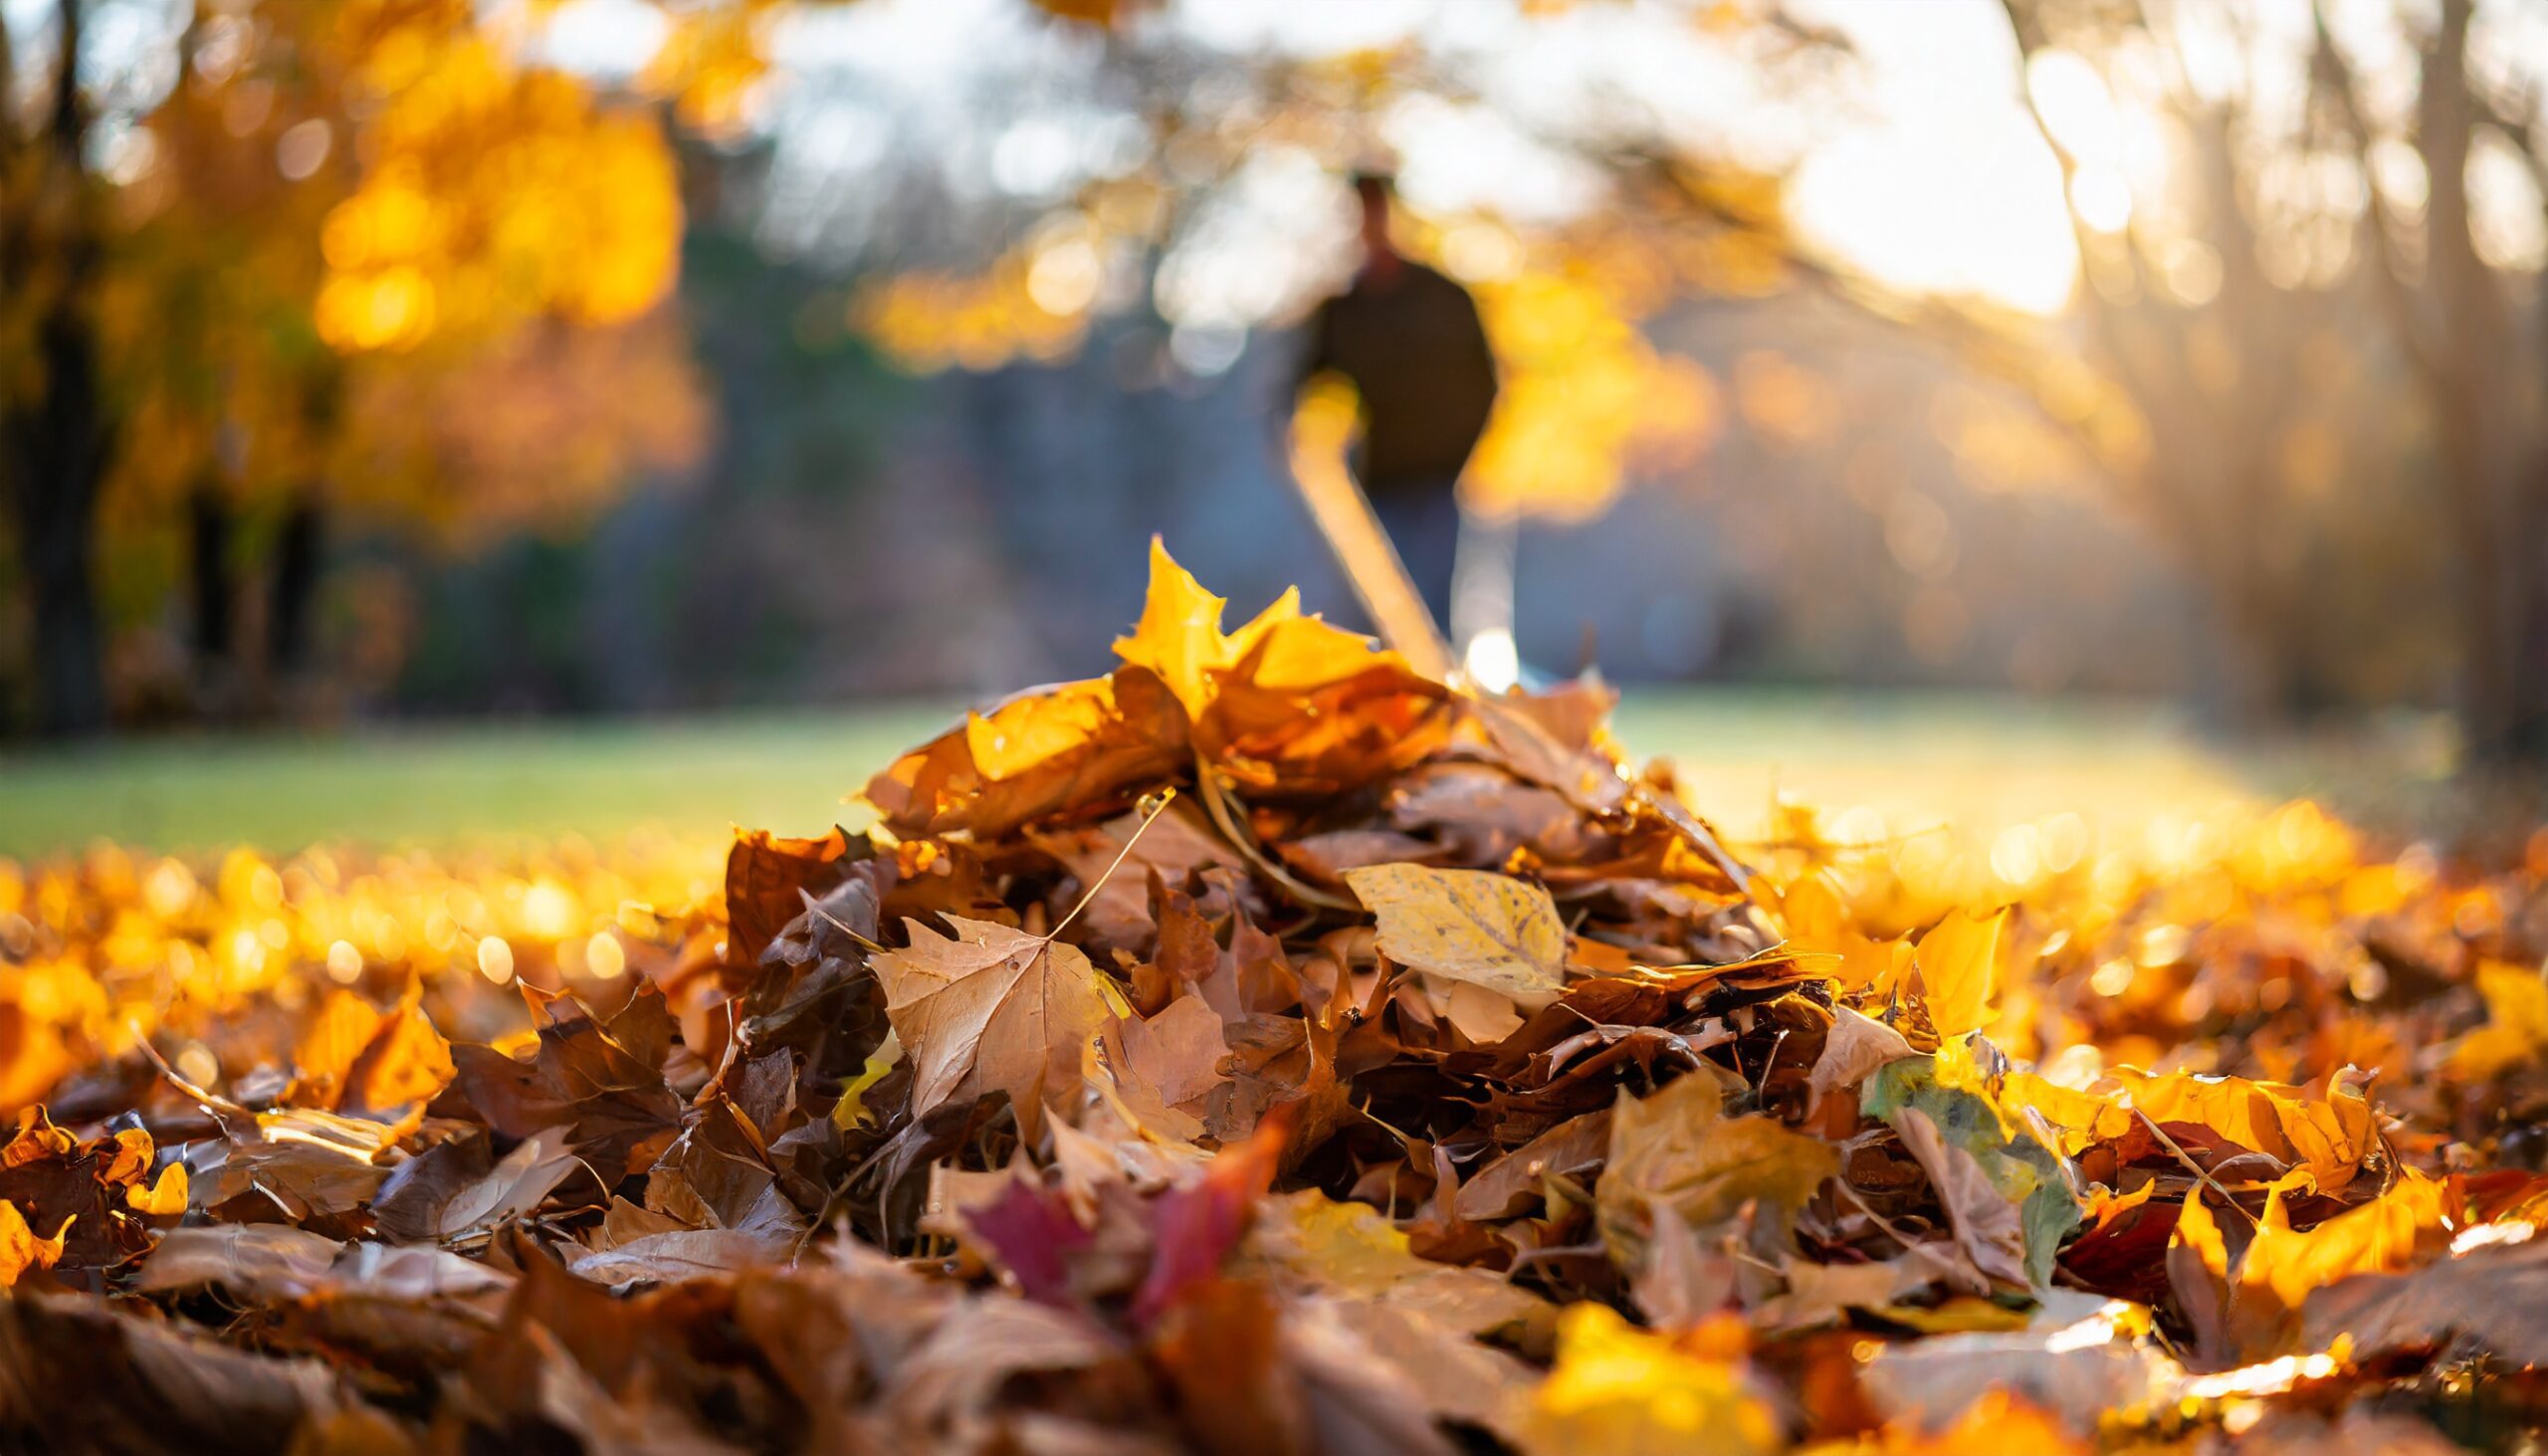 Person standing on a freshly cleaned lawn after a successful leaf clean up, with a pile of colorful autumn leaves in the foreground.